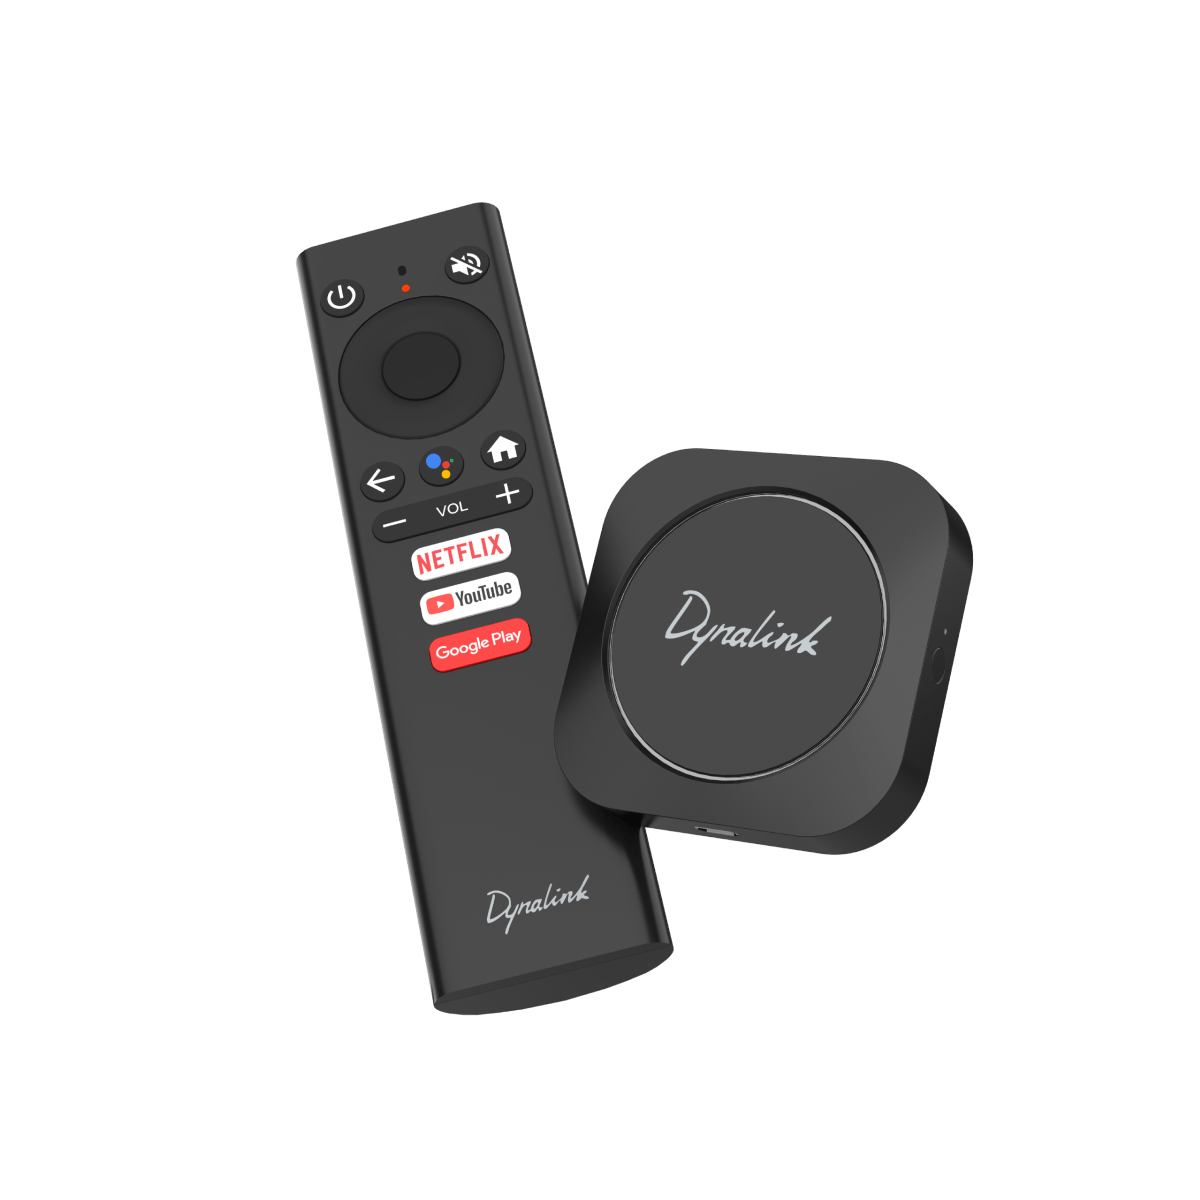 Wholesale Samsung Android Tv Box Allows Cable, TV, Or Streaming 